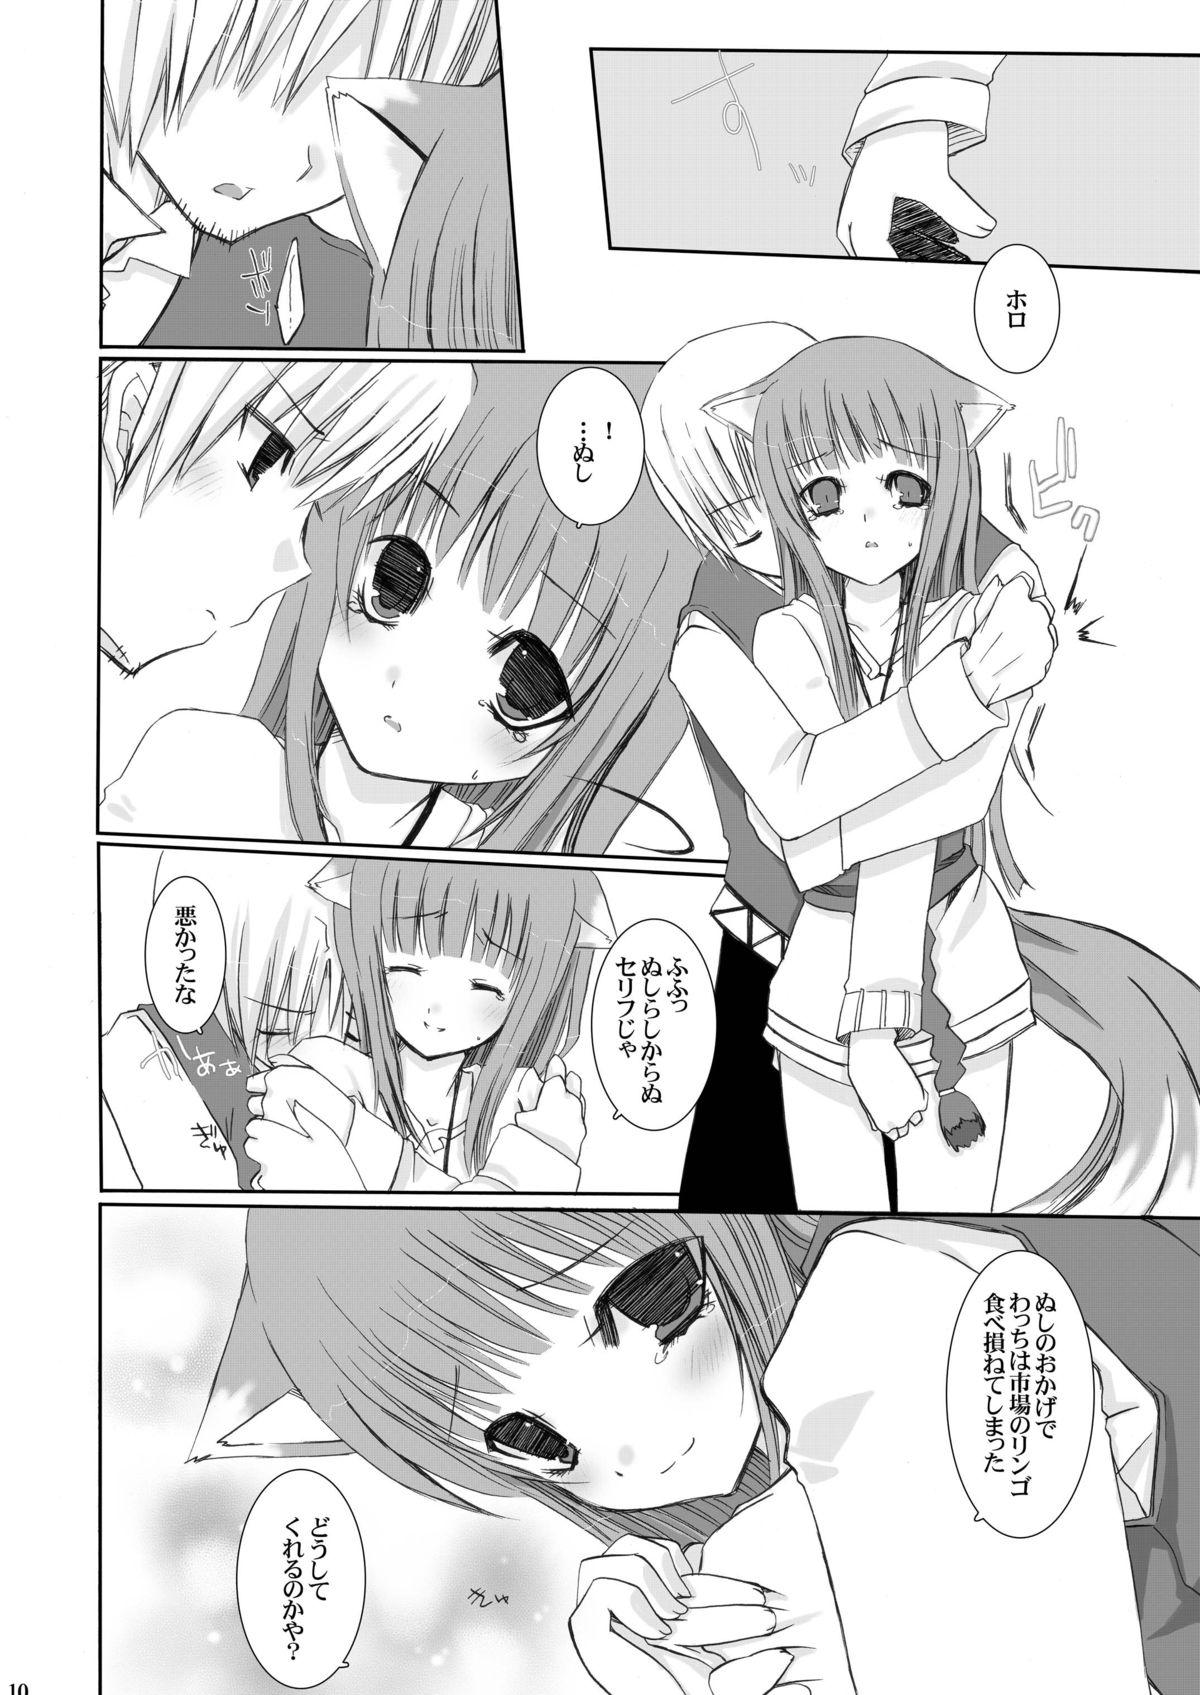 Ex Girlfriends Fukigen na Ookami - Spice and wolf Squirt - Page 10